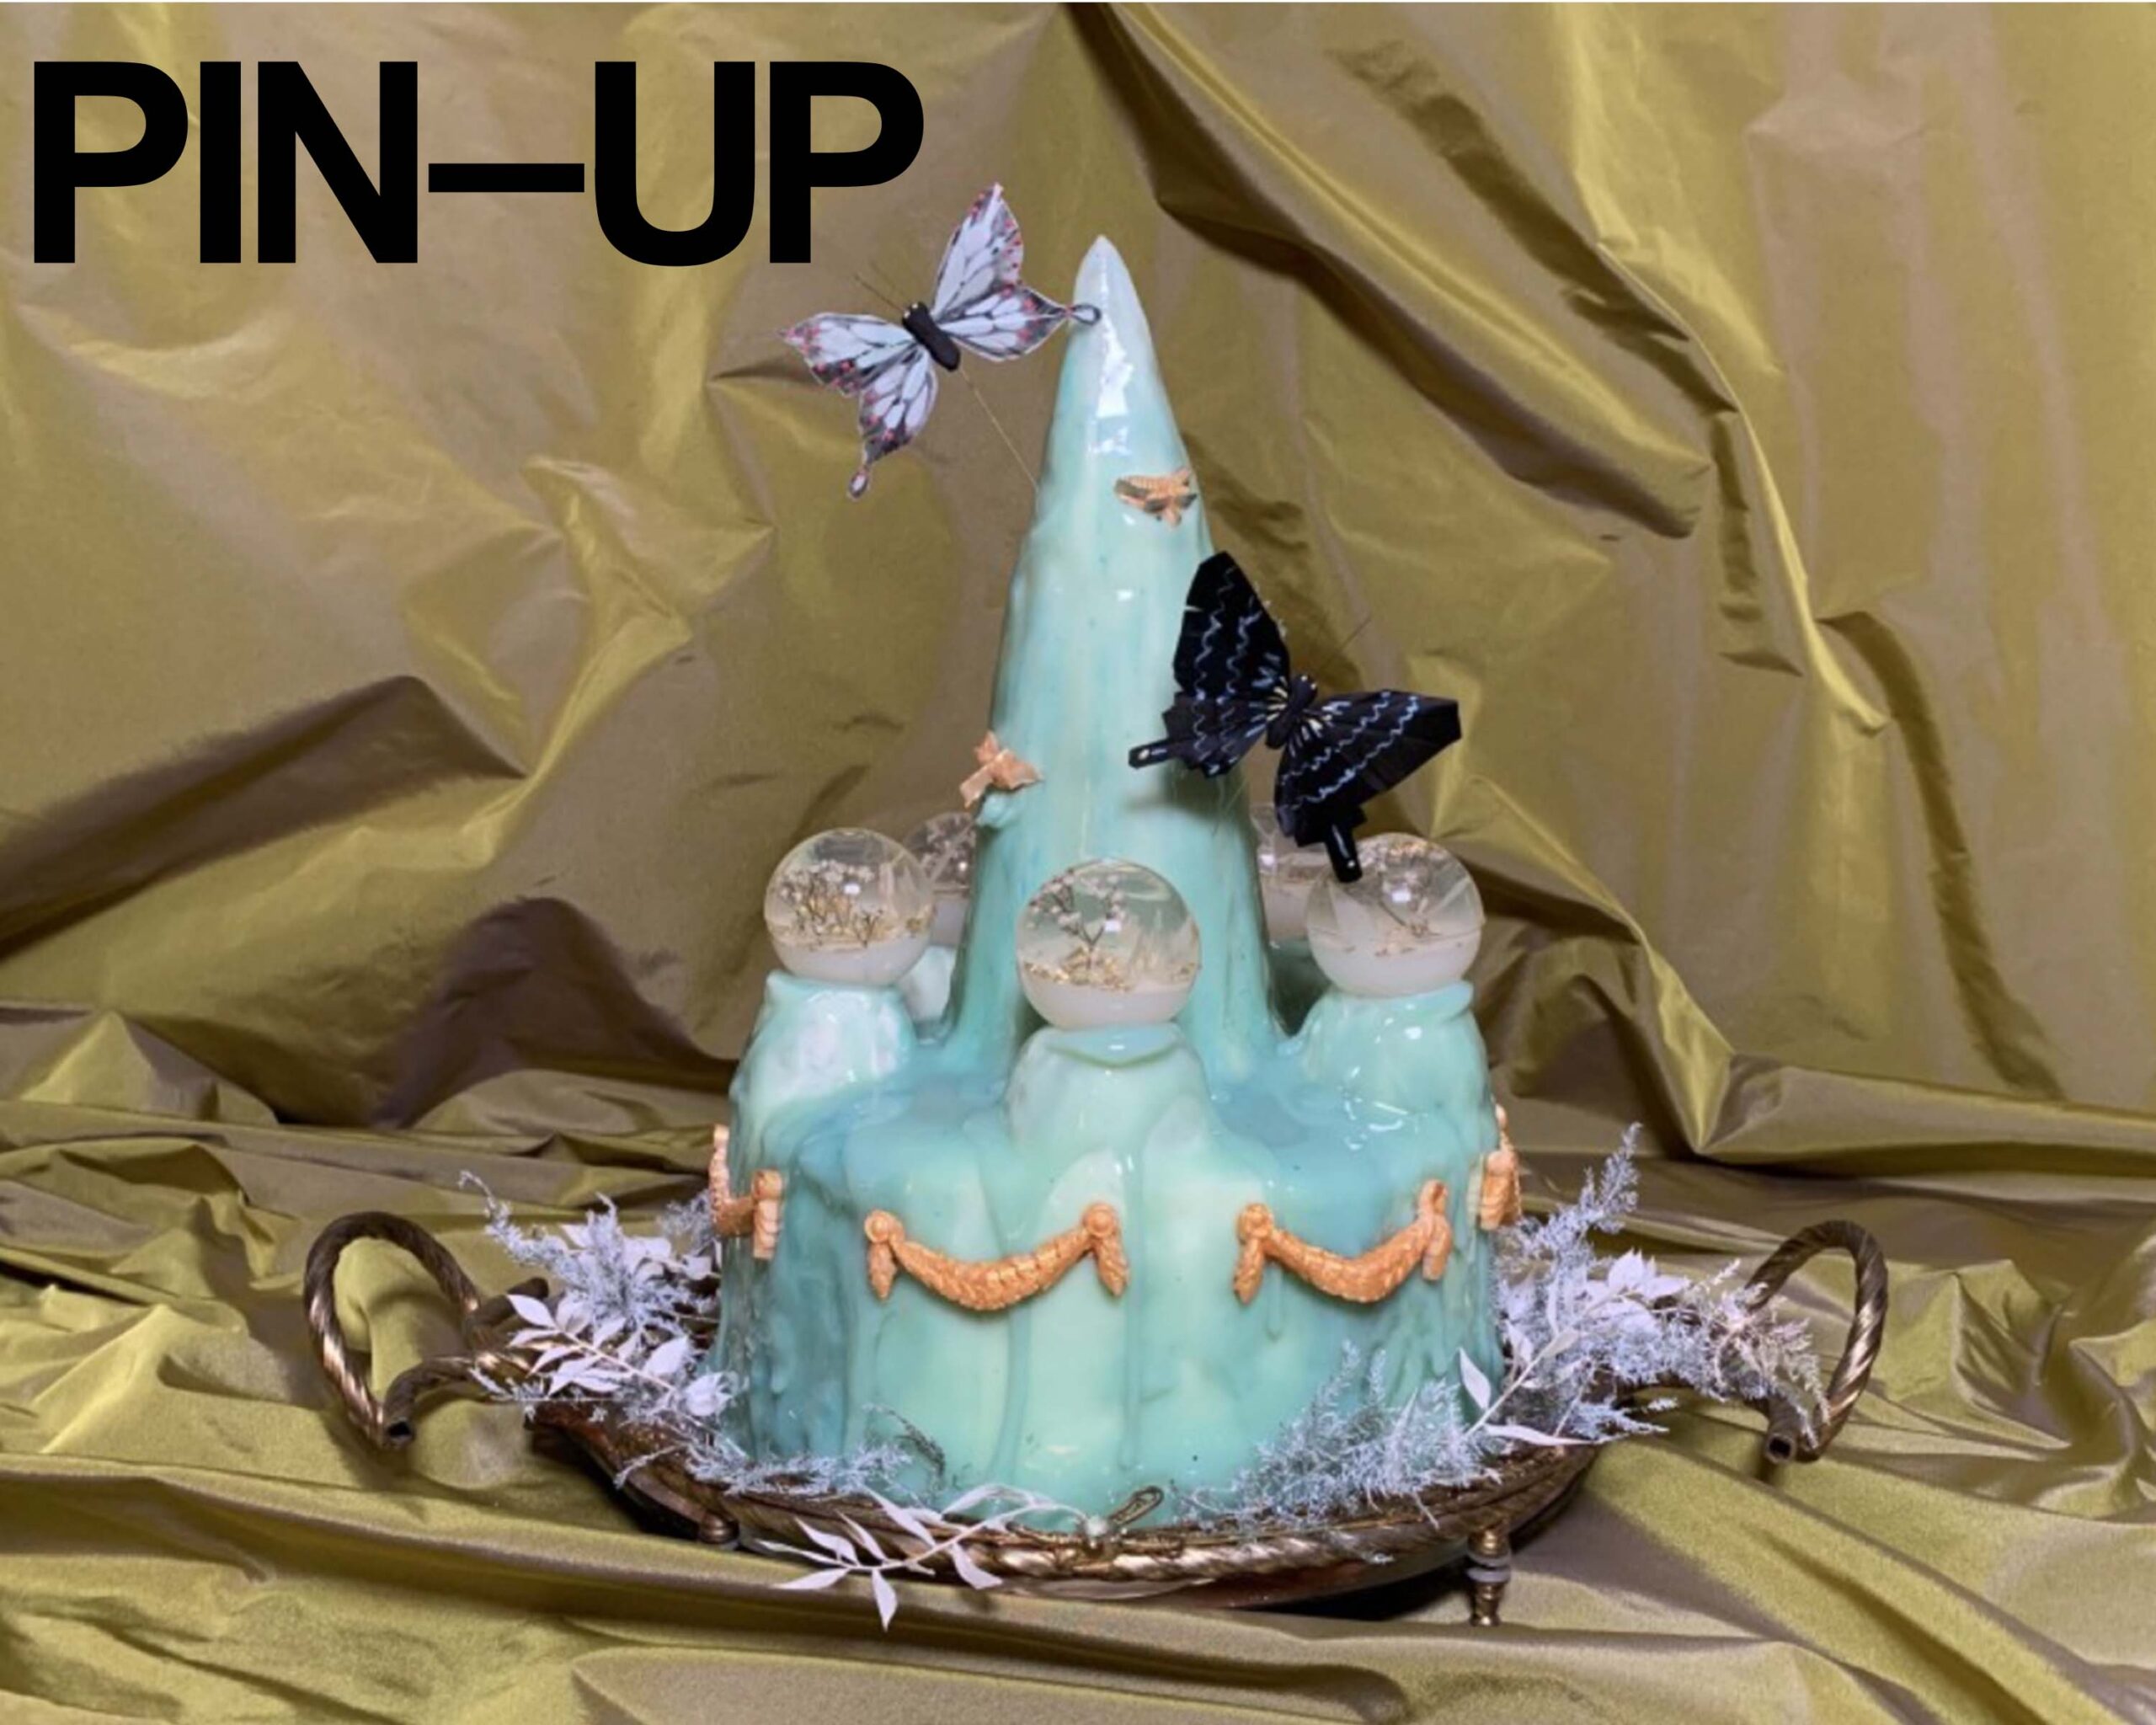 Pin Up Magazine, 2020 | The Politics Behind Sharona Franklin's Sculptural Jelly Cakes